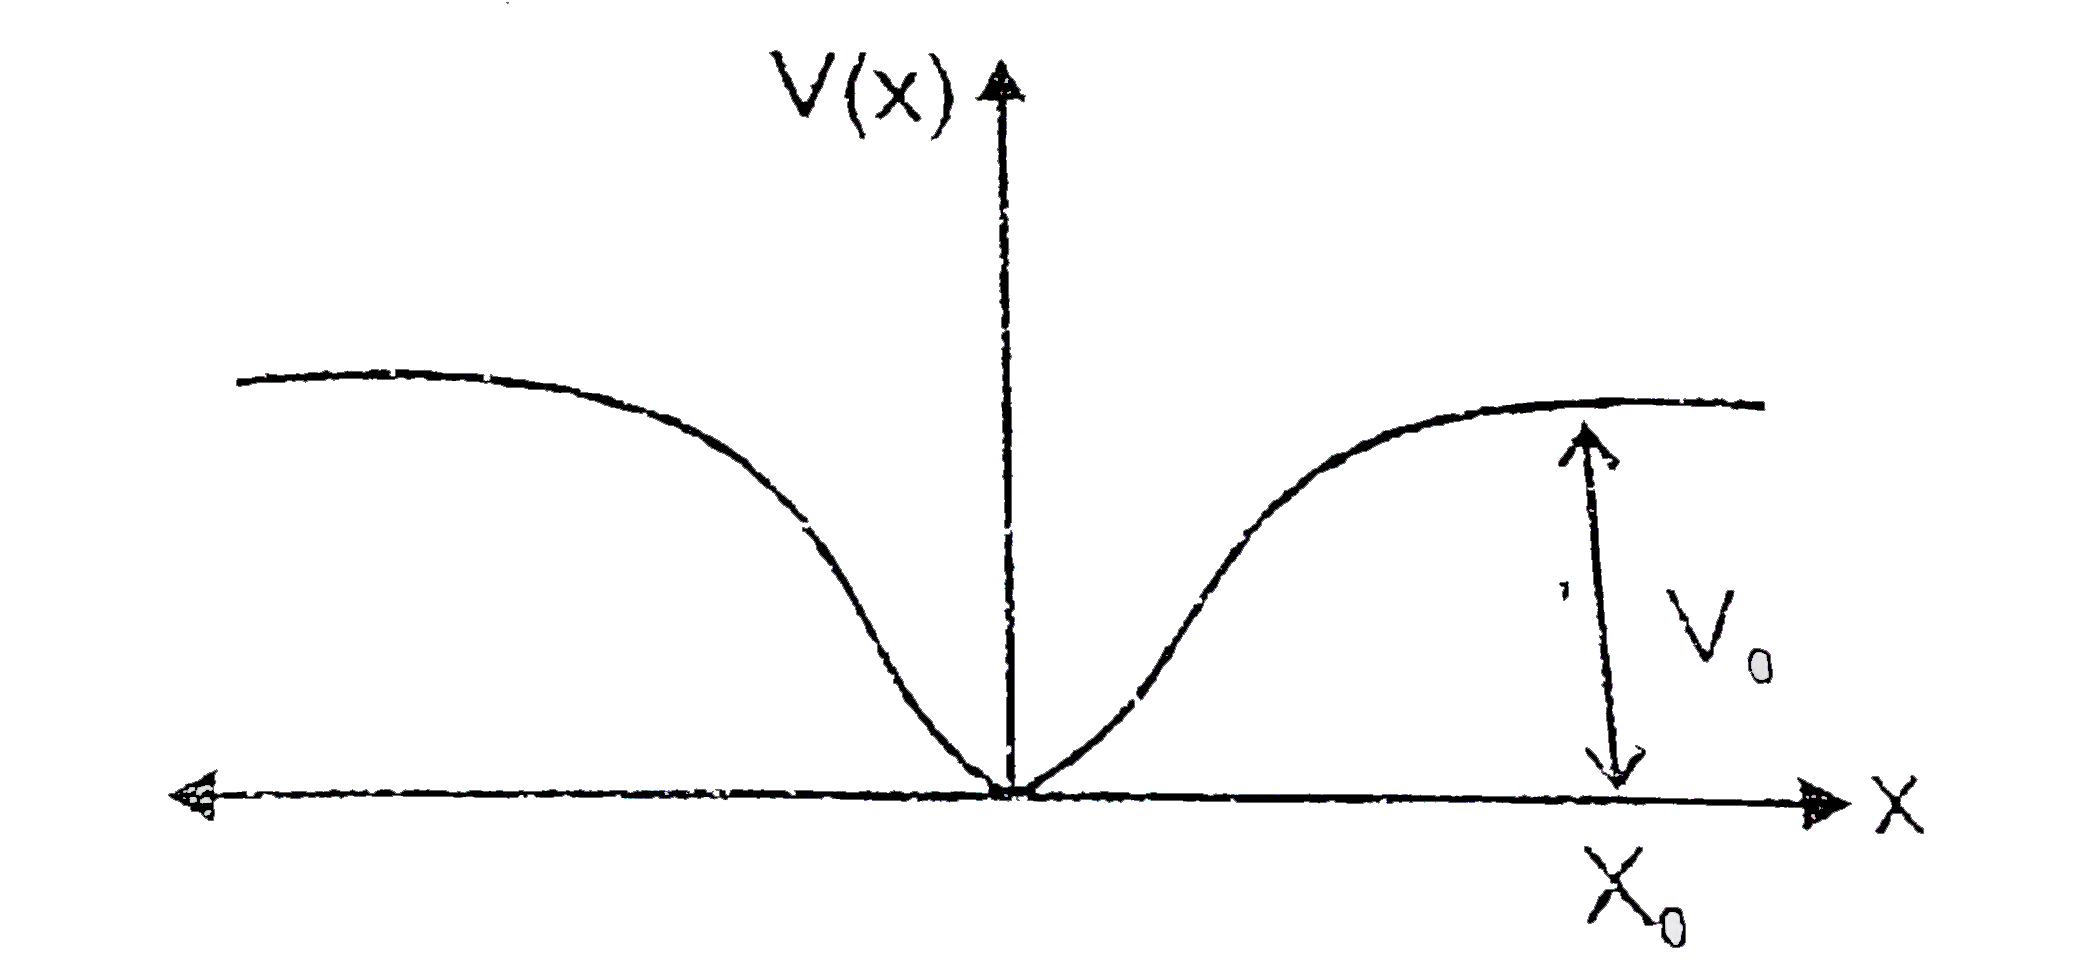 When a particle is mass m moves on the x- axis in a potential of the from V(x) = kx^(2), it performs simple harmonic motion. The corresponding thime periond is proportional to sqrt((m)/(k)), as can be seen easily asing dimensional analysis. However, the motion of a pariticle can be periodic even when its potential enem increases on both sides x = 0 in a way different from kx^(2) and its total energy is such that the particel does not escape to infinity. consider a particle of mass m moving onthe x-axis . Its potential energy is V(x) =  alpha *x^4 (alpha gt 0) for |x| near the origin and becomes a constant equal to V(0) for |x| ge X(0) (see figure)      If the total energy of the particle is E, it will perform is periodic motion why if :